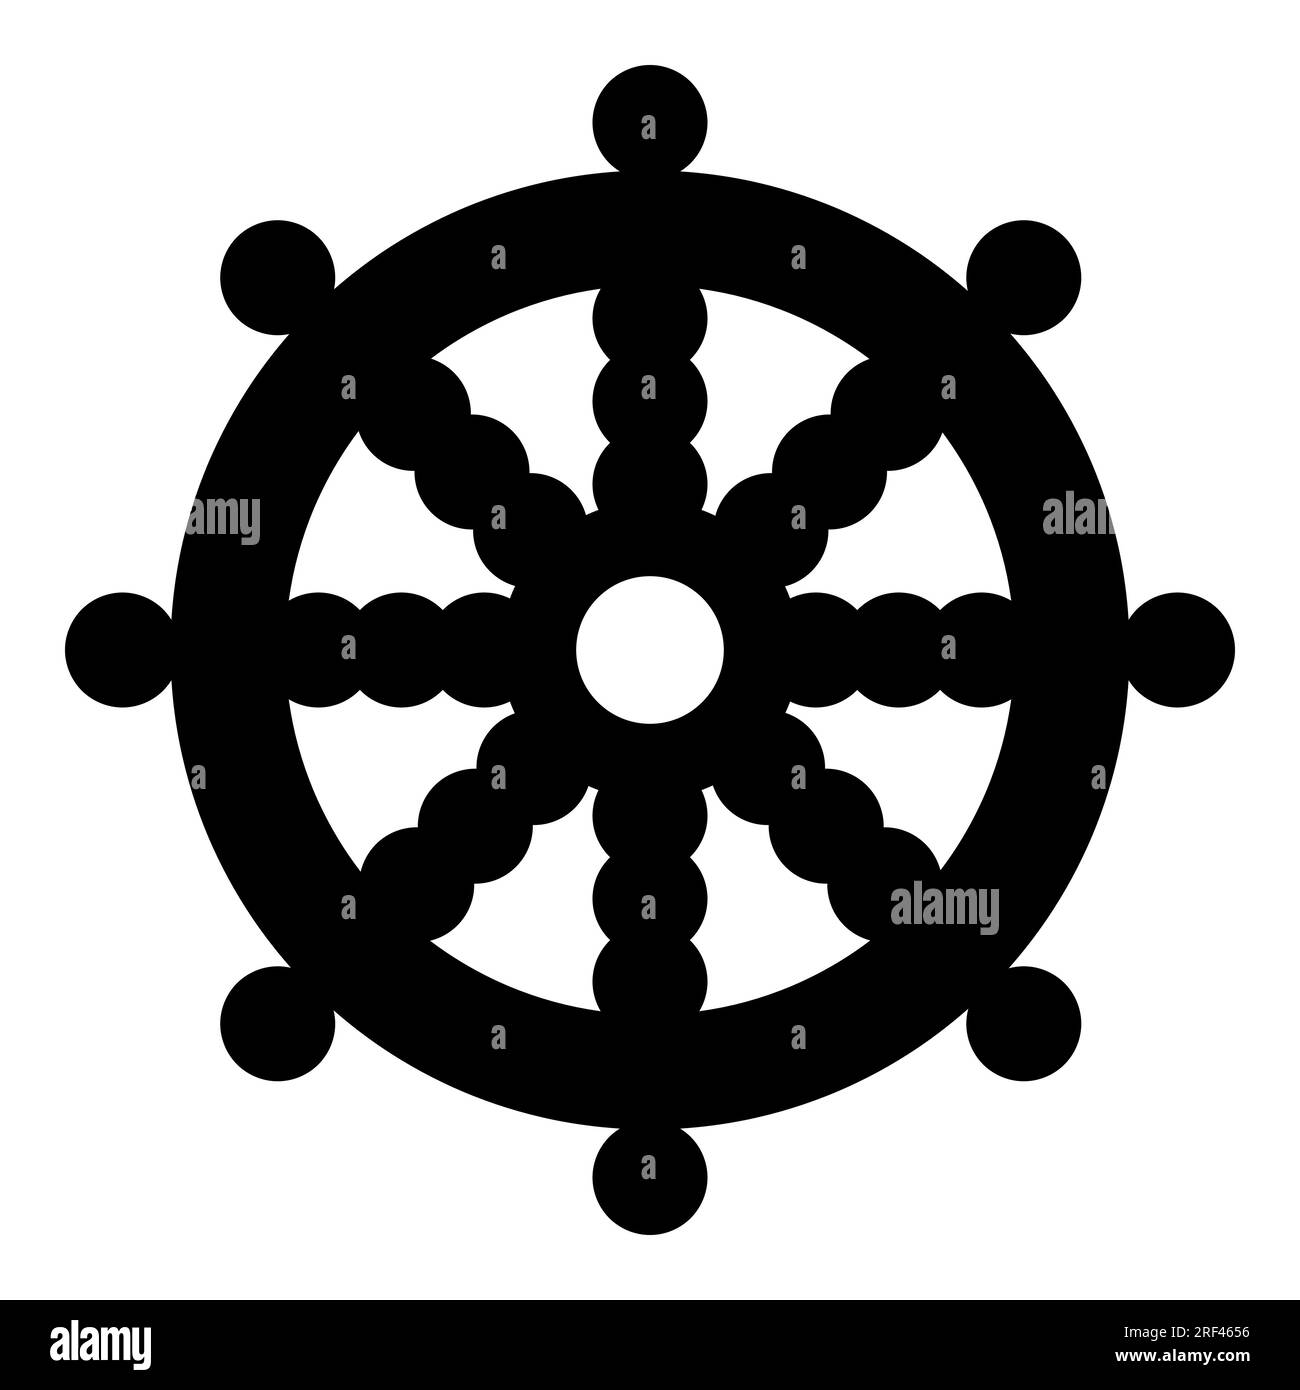 Dharmachakra / Wheel of Dharma - a symbol of Buddhism and Hinduism flat icon for apps and websites Stock Vector